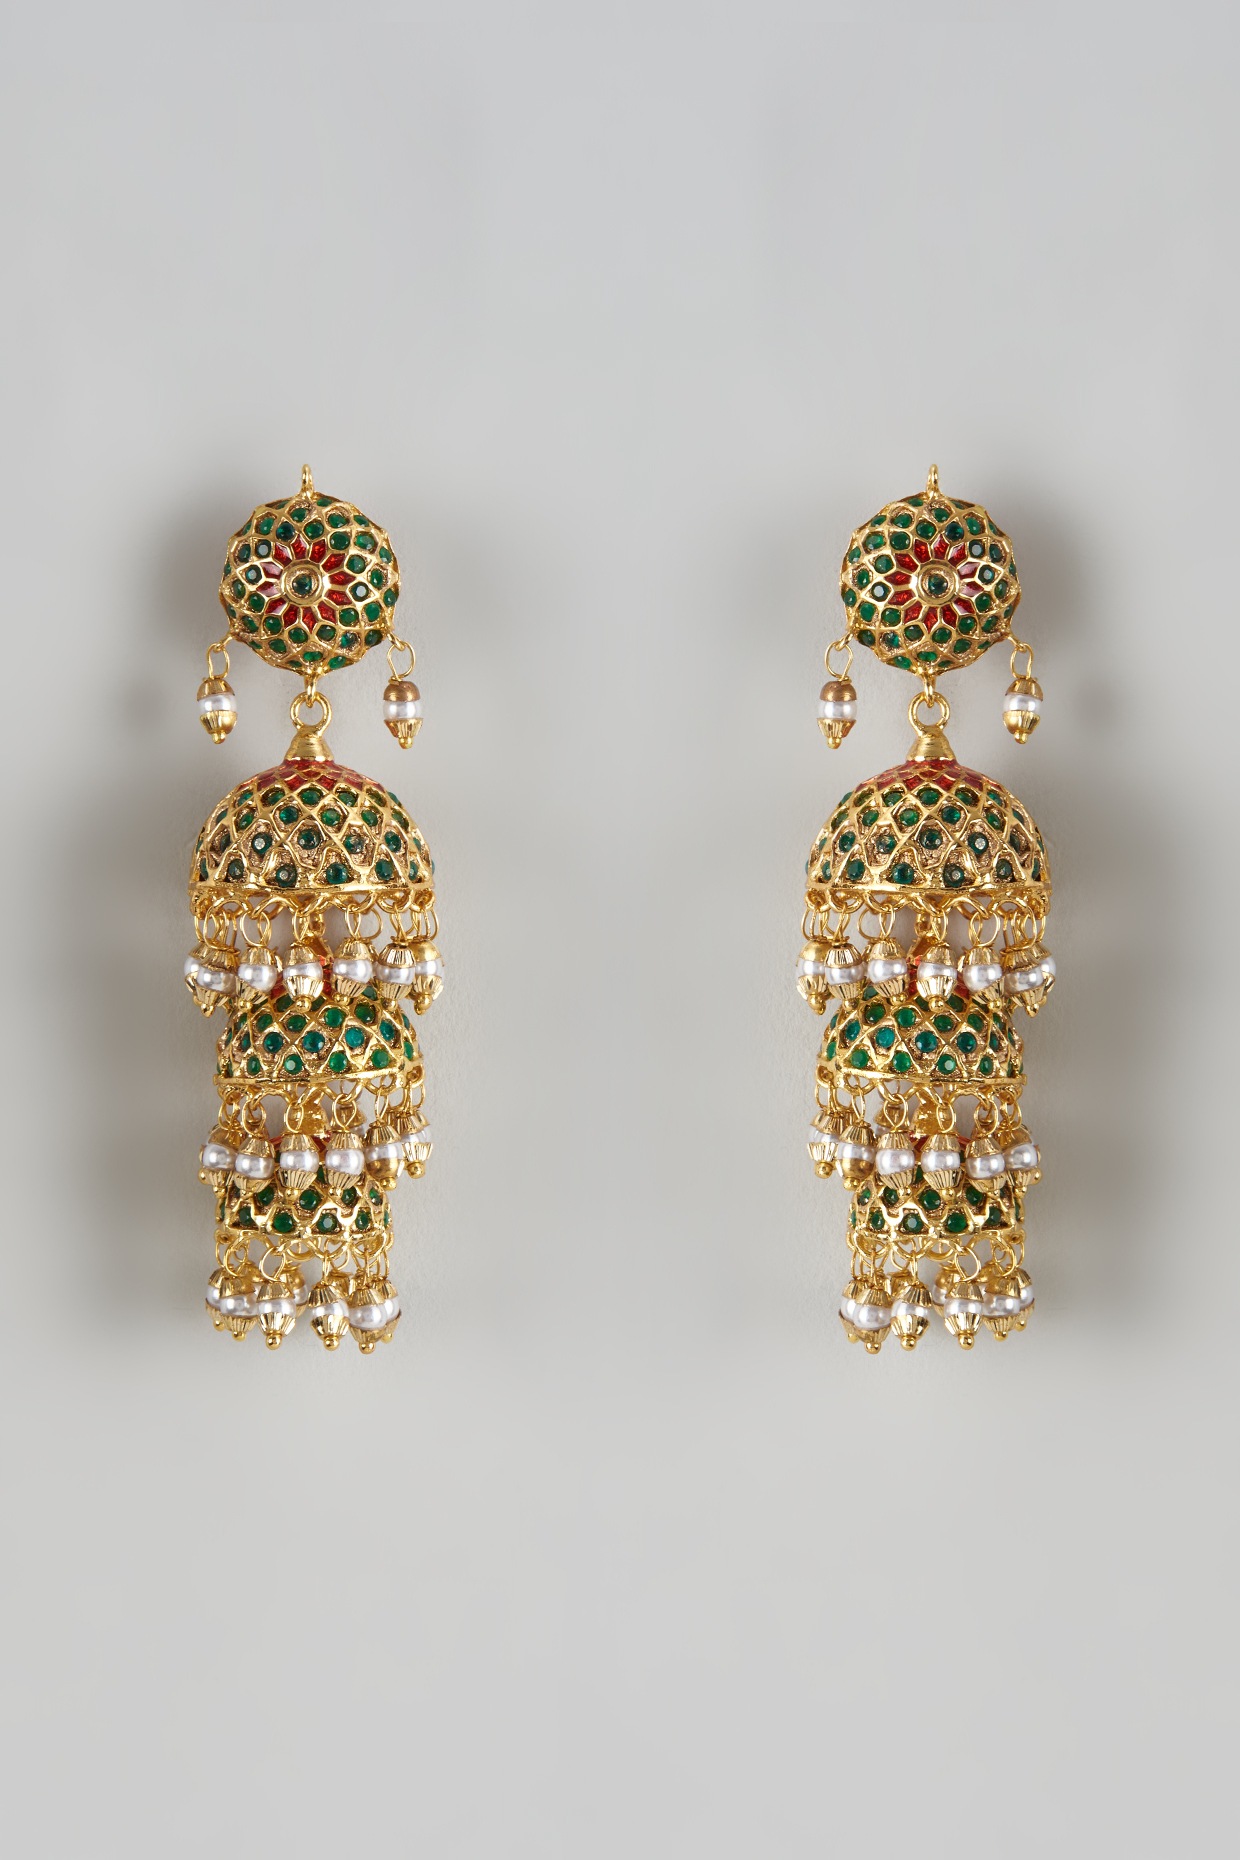 Flipkart.com - Buy MEENAZ South indian Temple Peacock Earrings moti Jhumka  Stylish Party wear design gold Brass, Stone, Metal, Alloy, Copper Jhumki  Earring Online at Best Prices in India